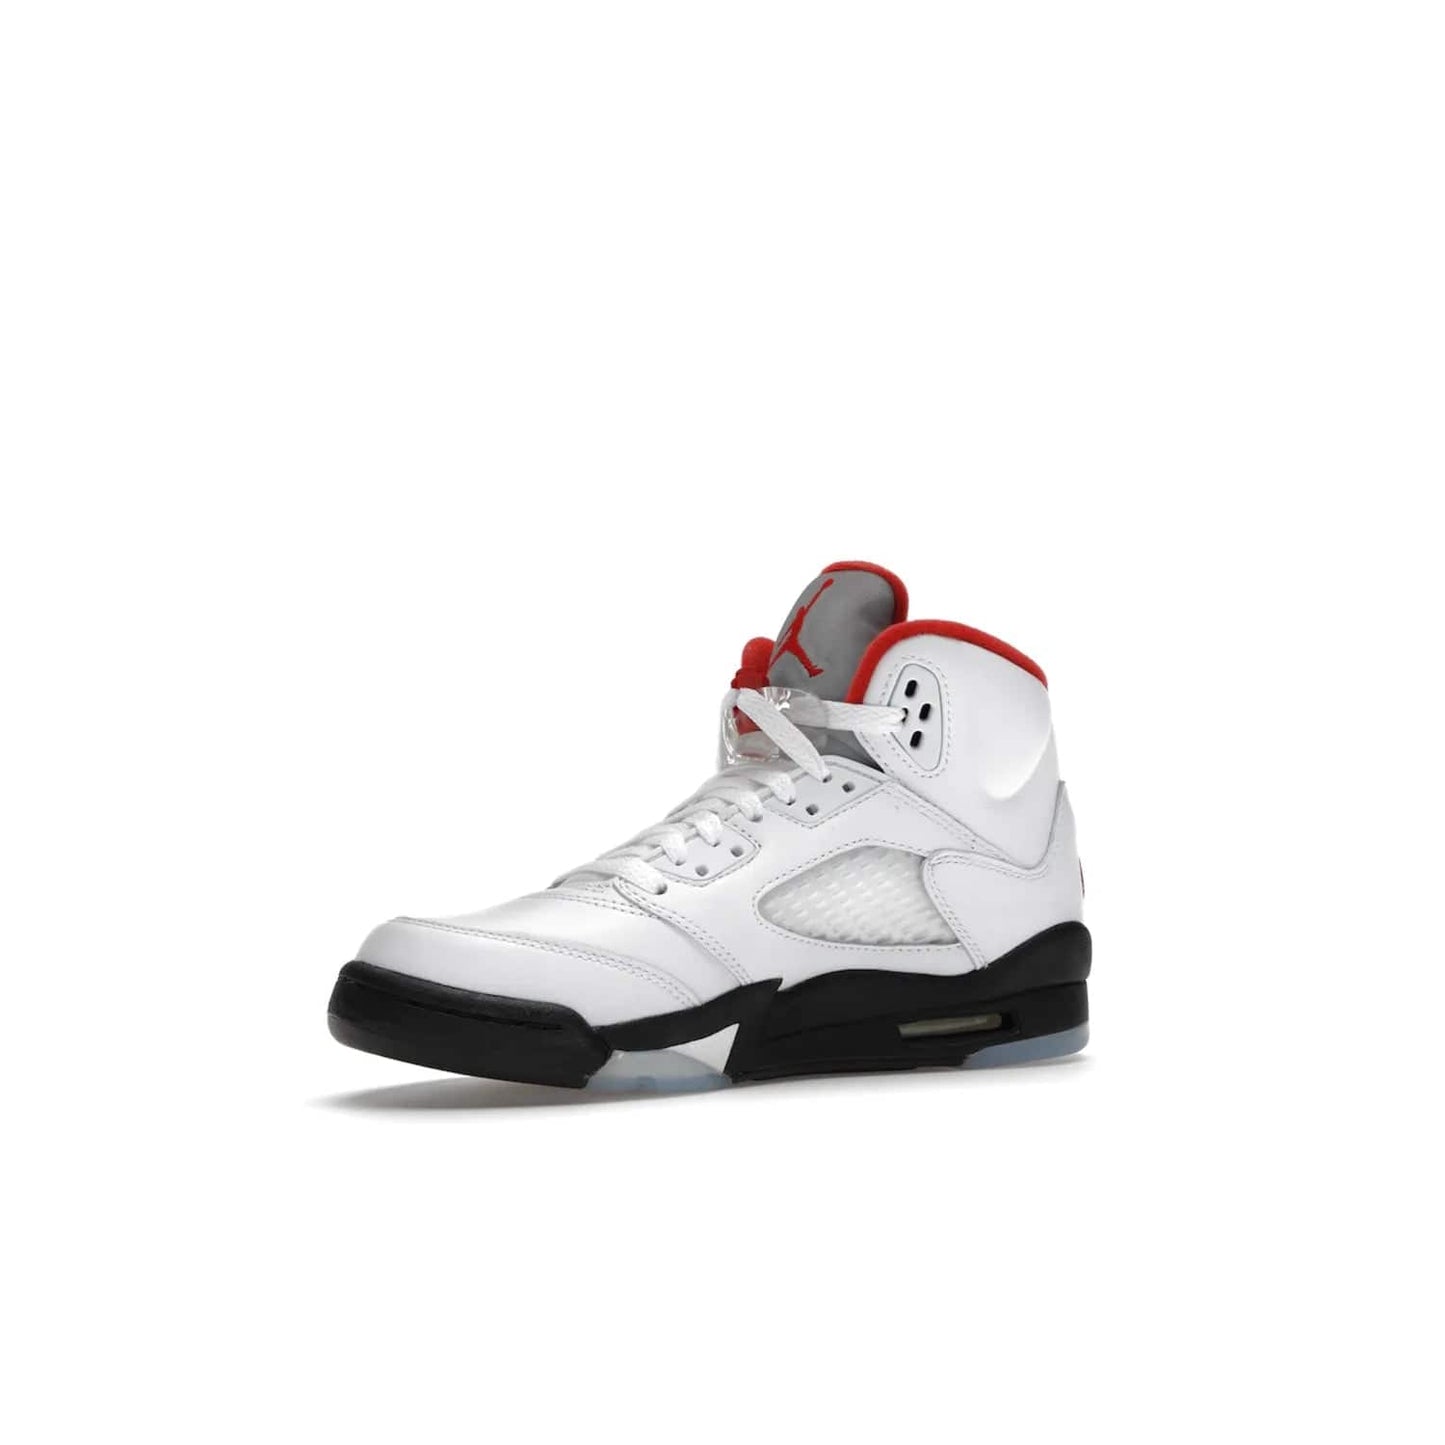 Jordan 5 Retro Fire Red Silver Tongue (2020) (GS) - Image 16 - Only at www.BallersClubKickz.com - A stylish option for any grade schooler. The Air Jordan 5 Retro Fire Red Silver Tongue 2020 GS features a combination of four hues, premium white leather, a clear mesh mid-upper and a reflective silver tongue. An icy translucent blue outsole completes the look. Available on May 2, $150.